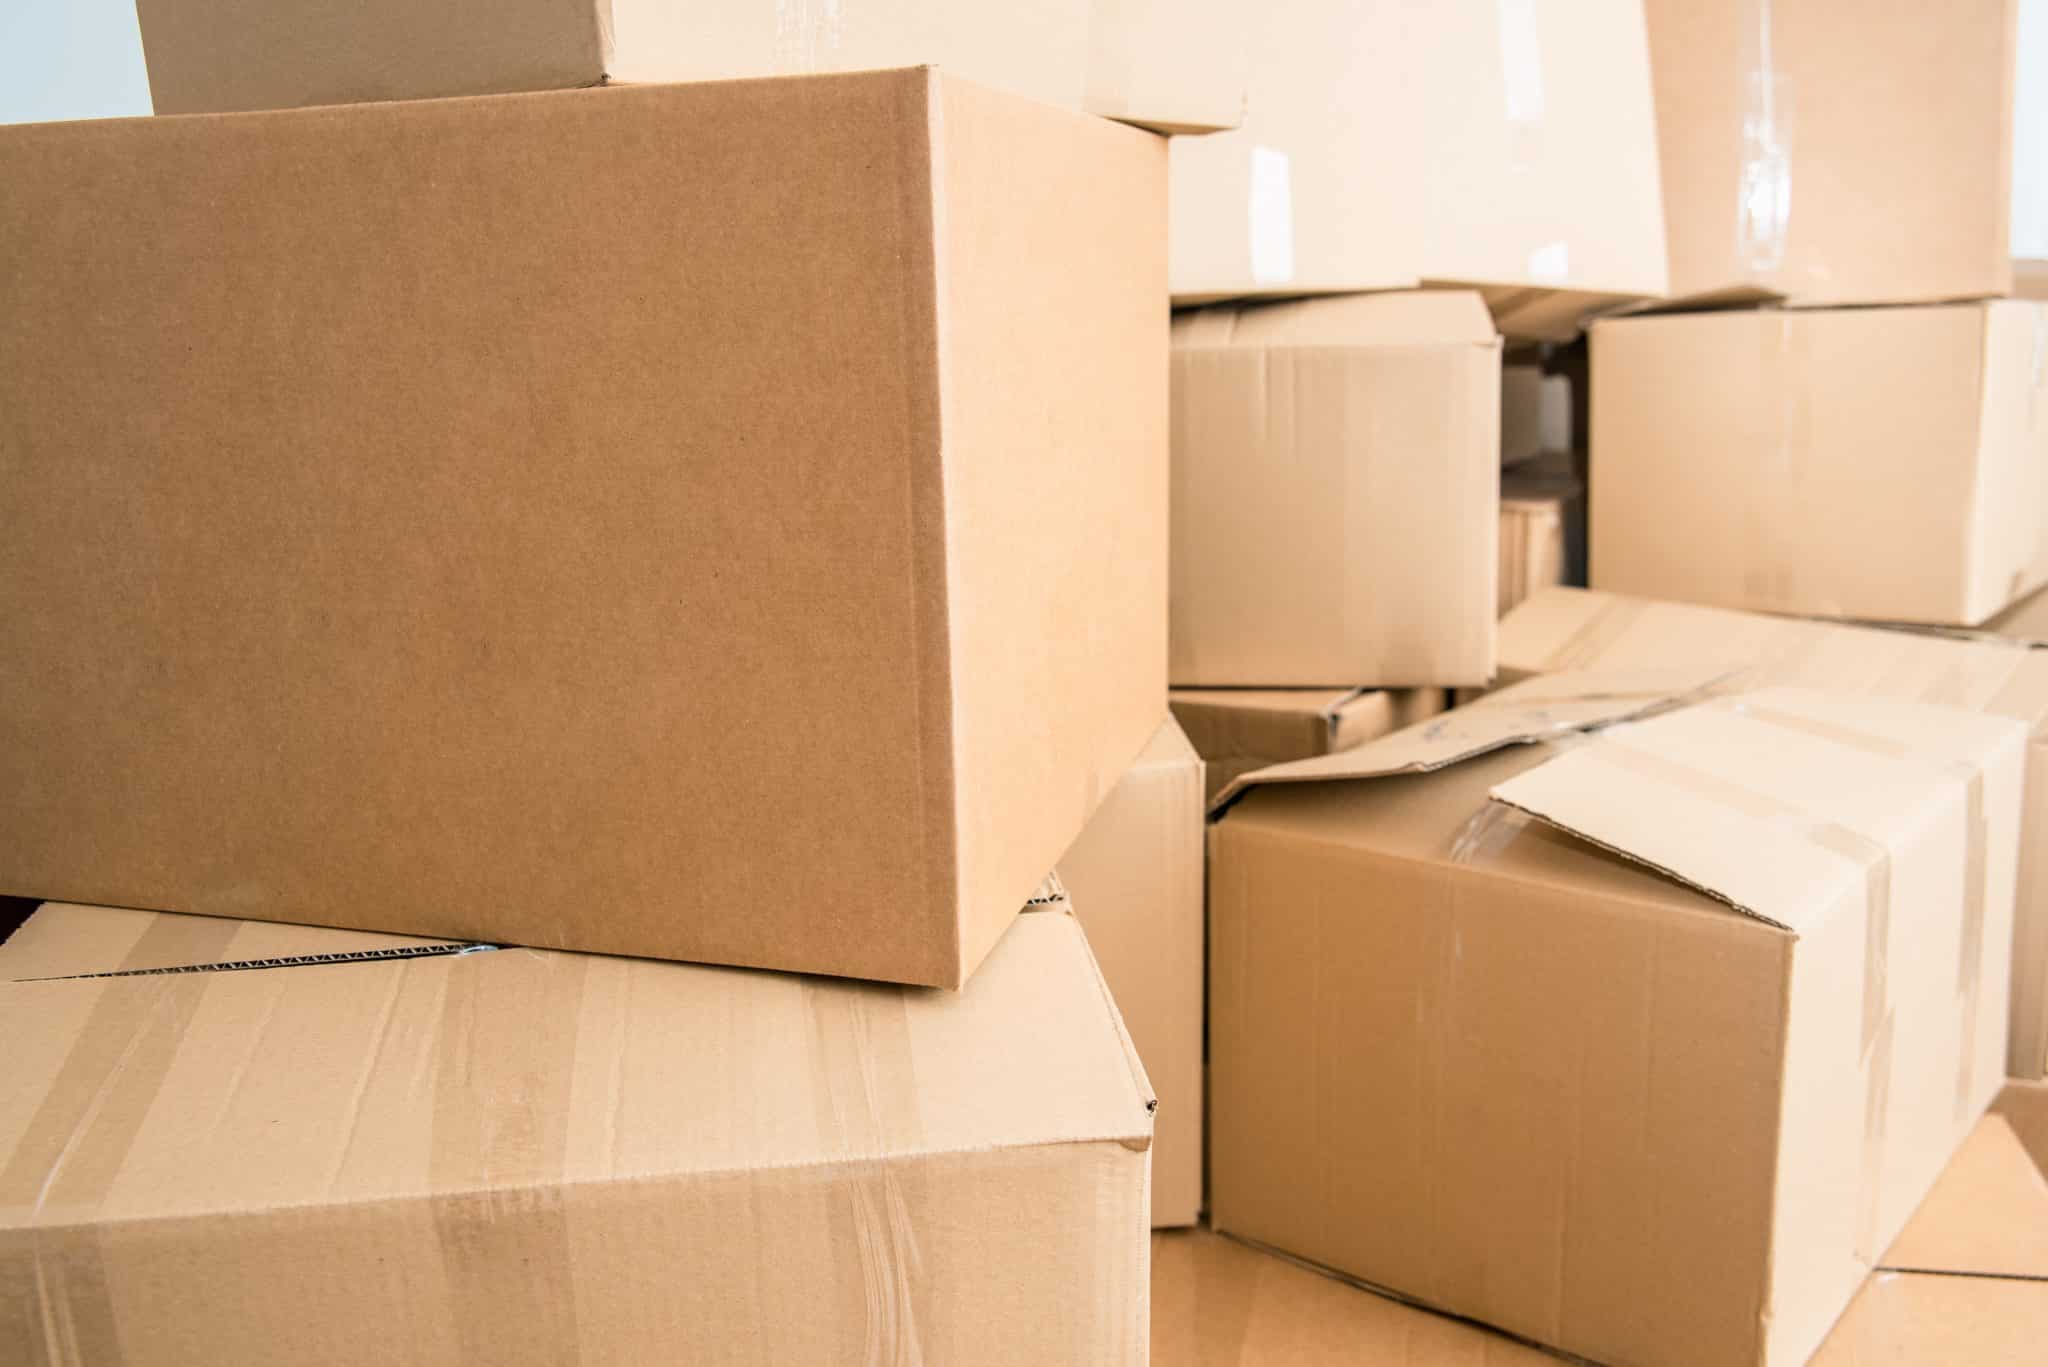 Moving Box Sizes & Types To Protect Your Move - Cento Moving